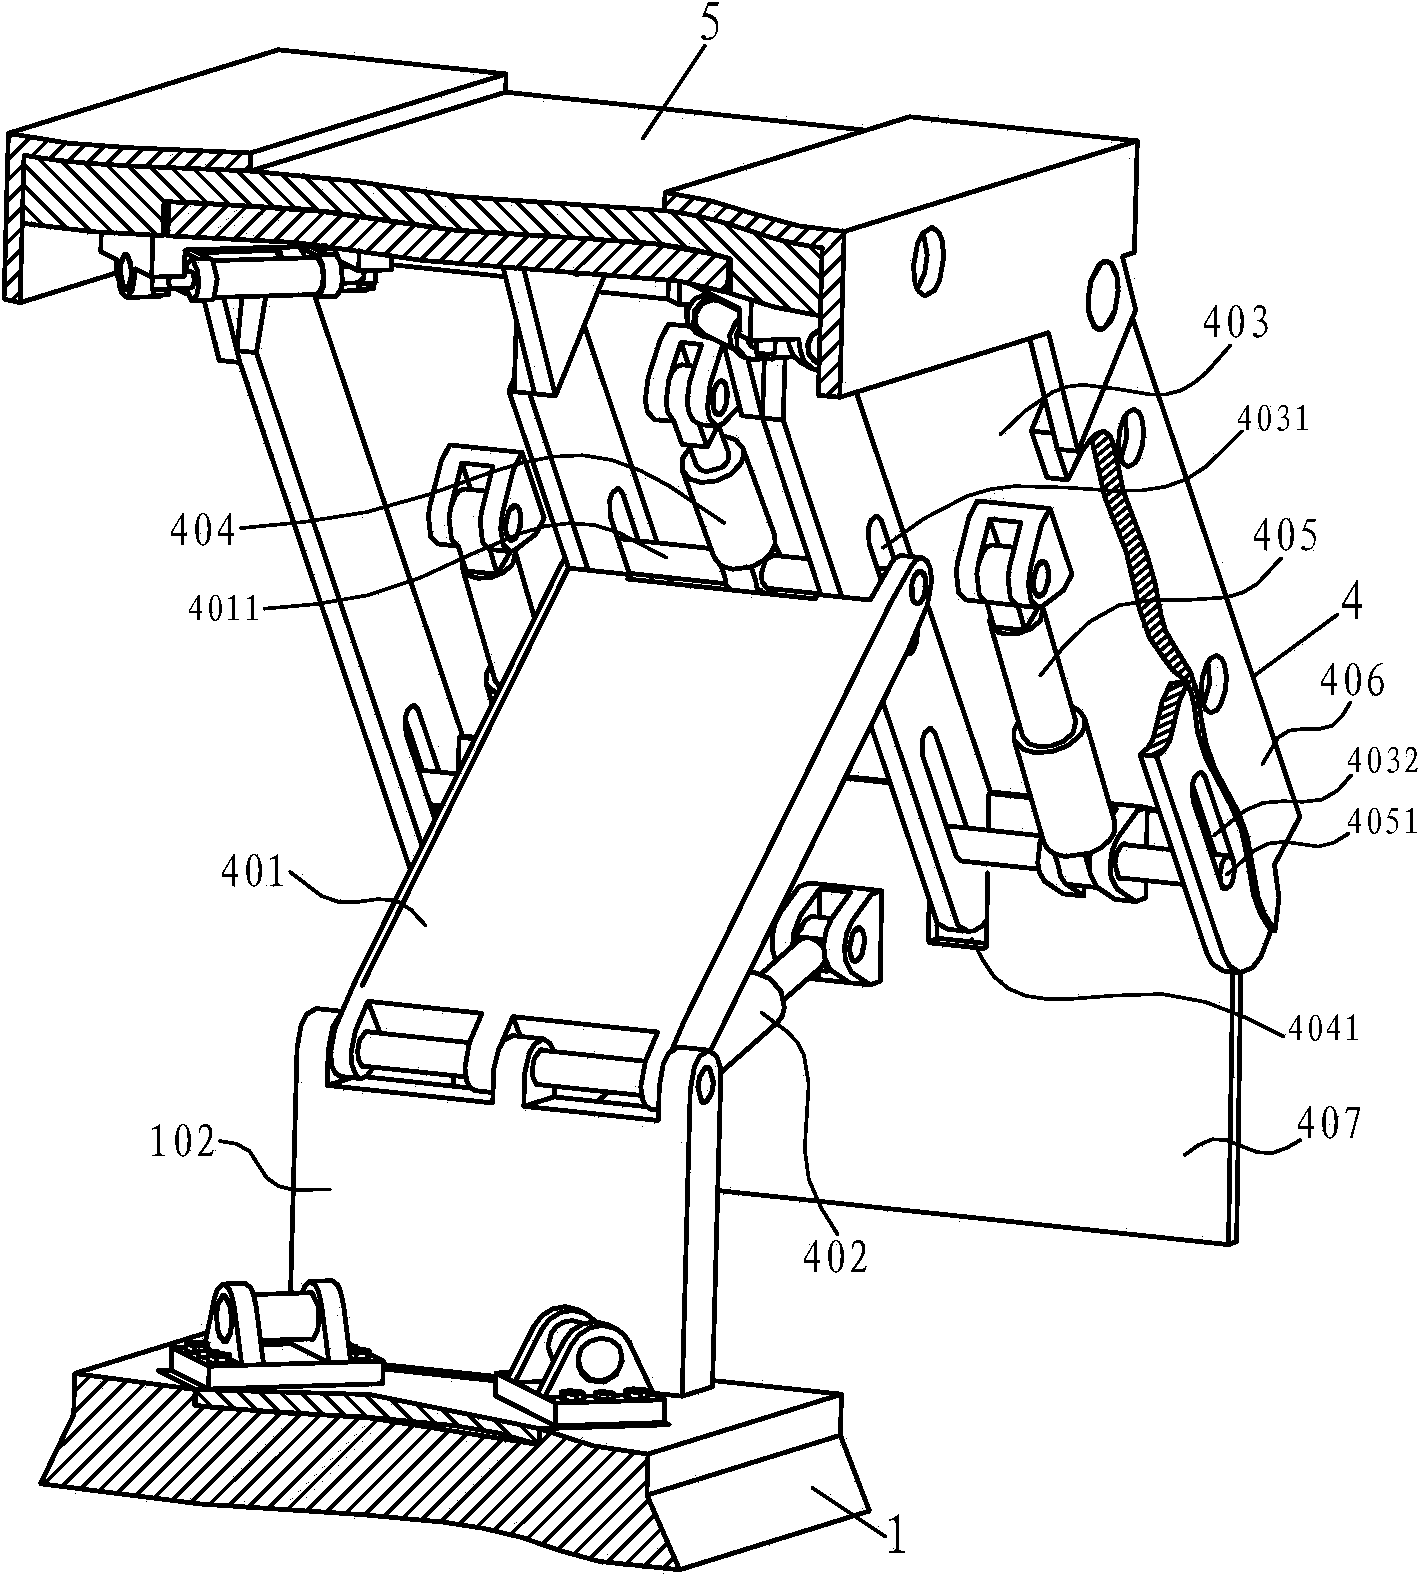 Three-freedom-degree parallel hydraulic support